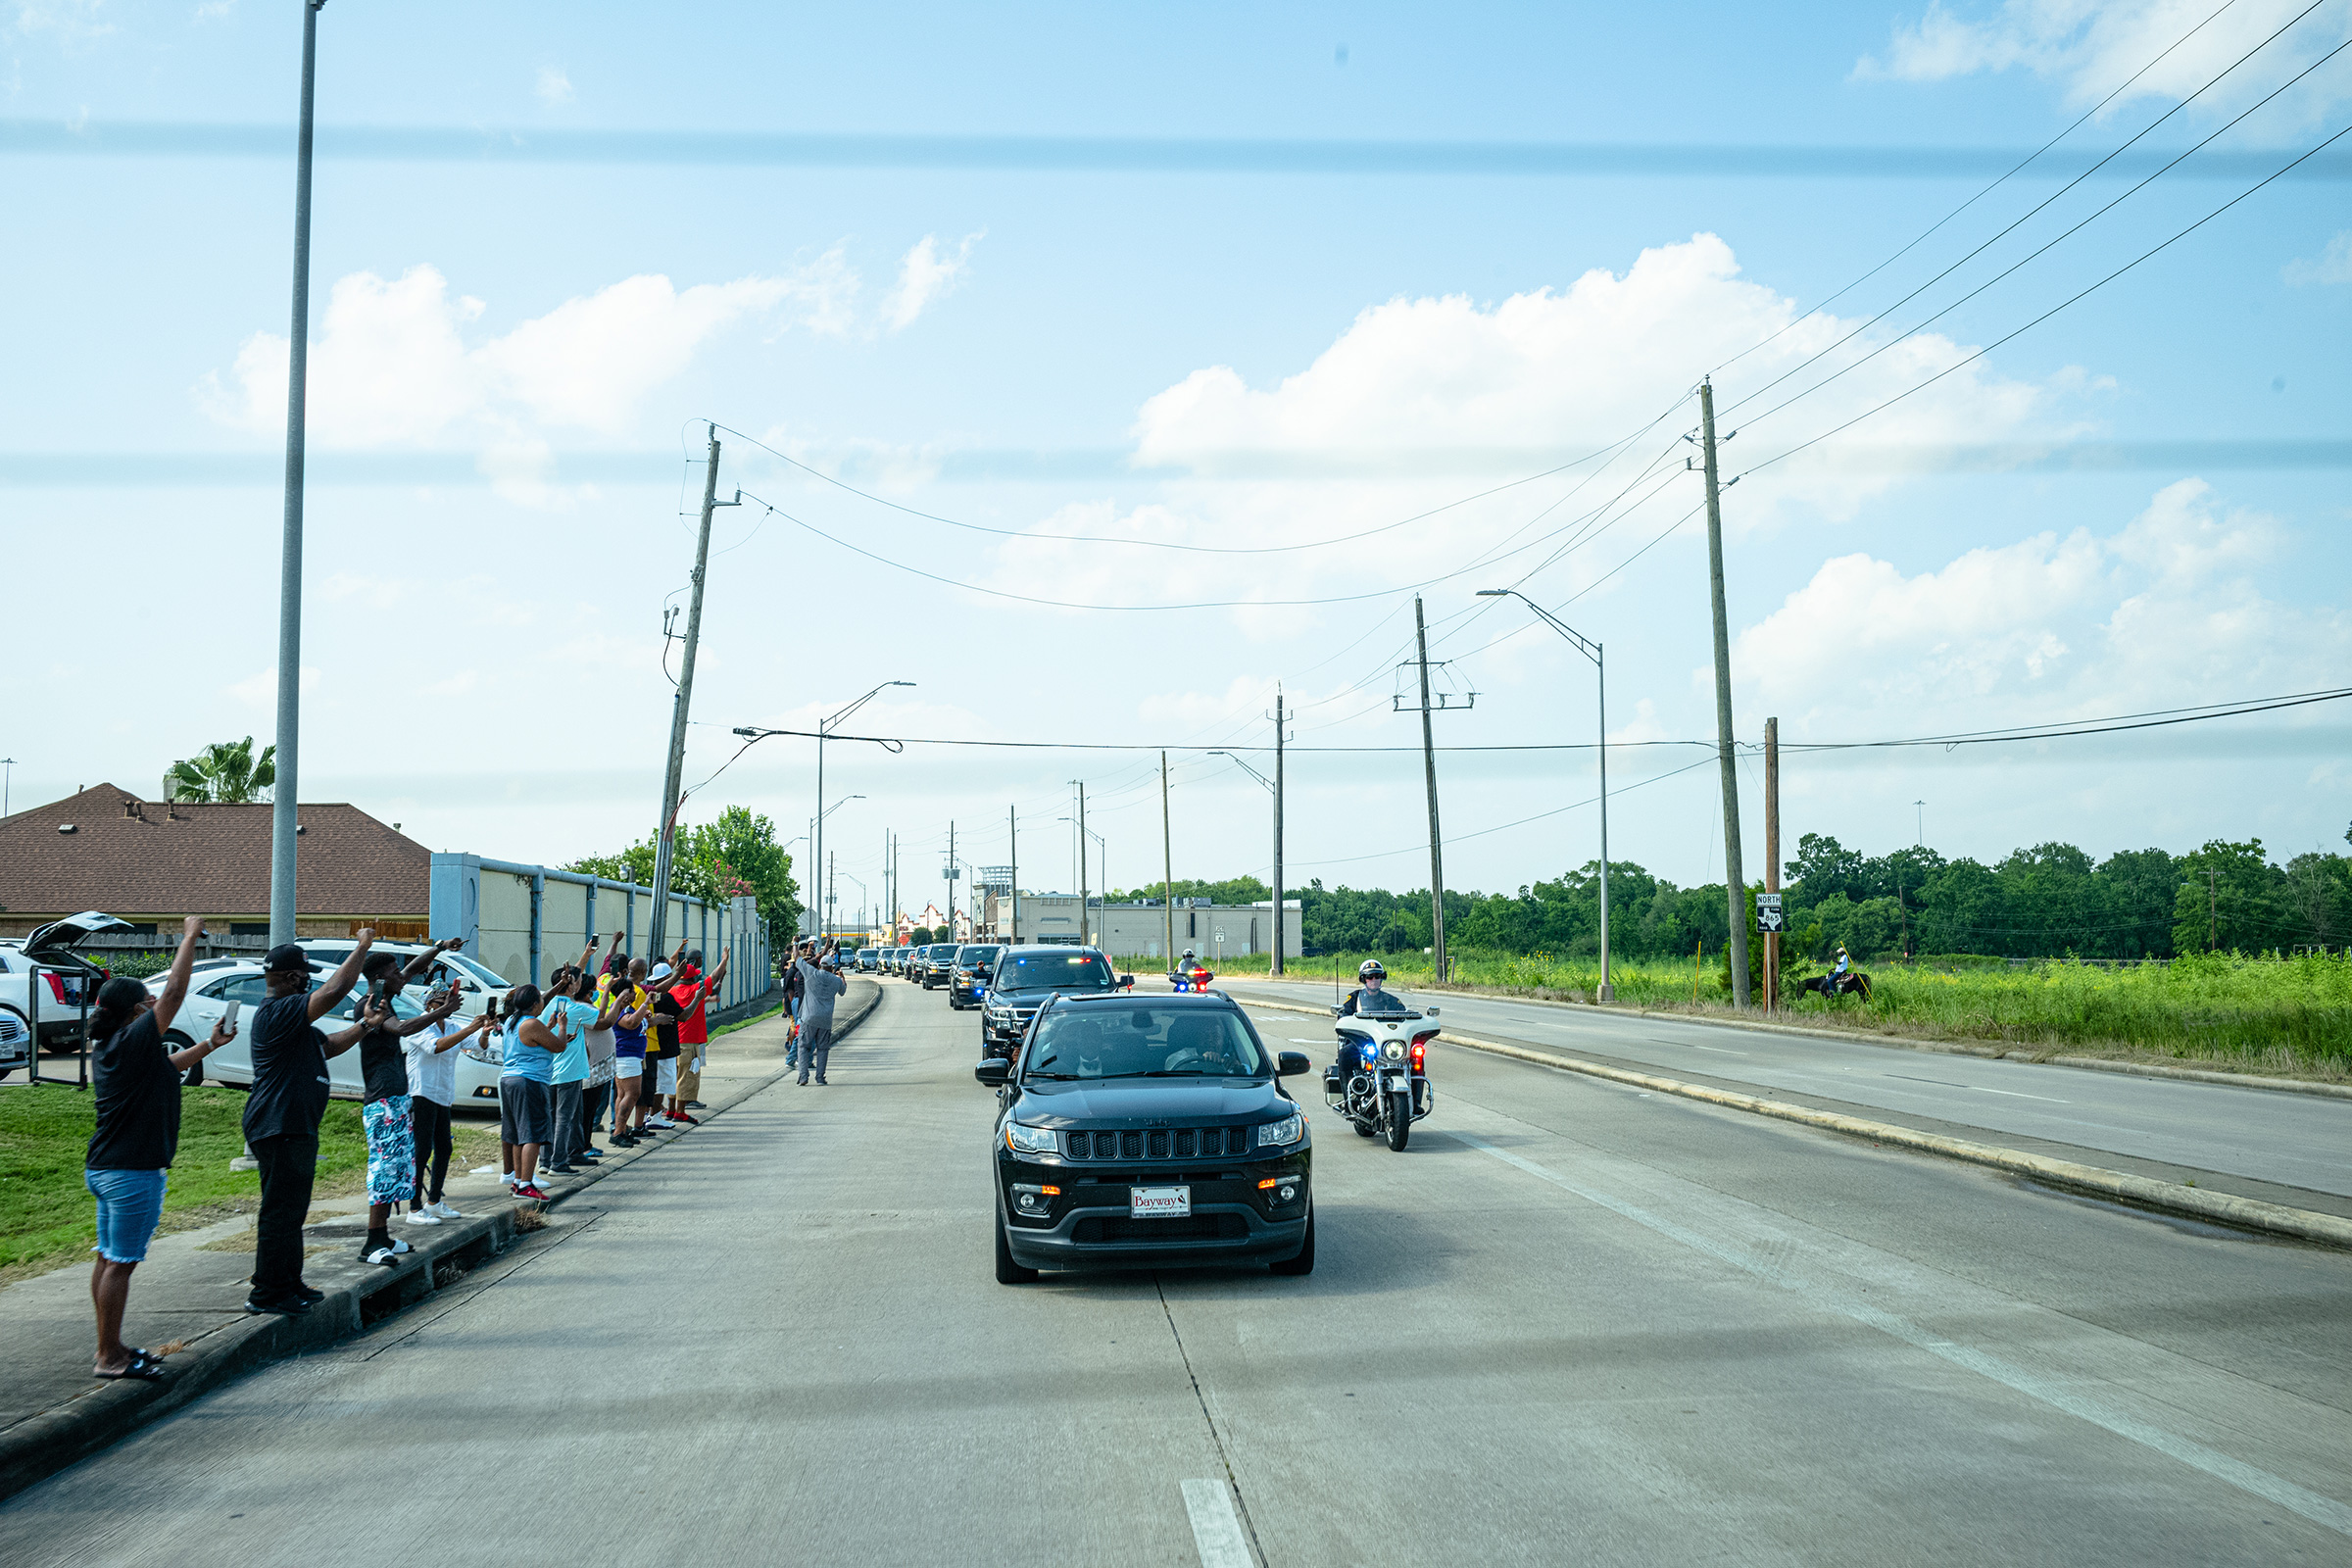 Supporters line up to see George Floyd's funeral procession on Jun 9. (Ruddy Roye for TIME)